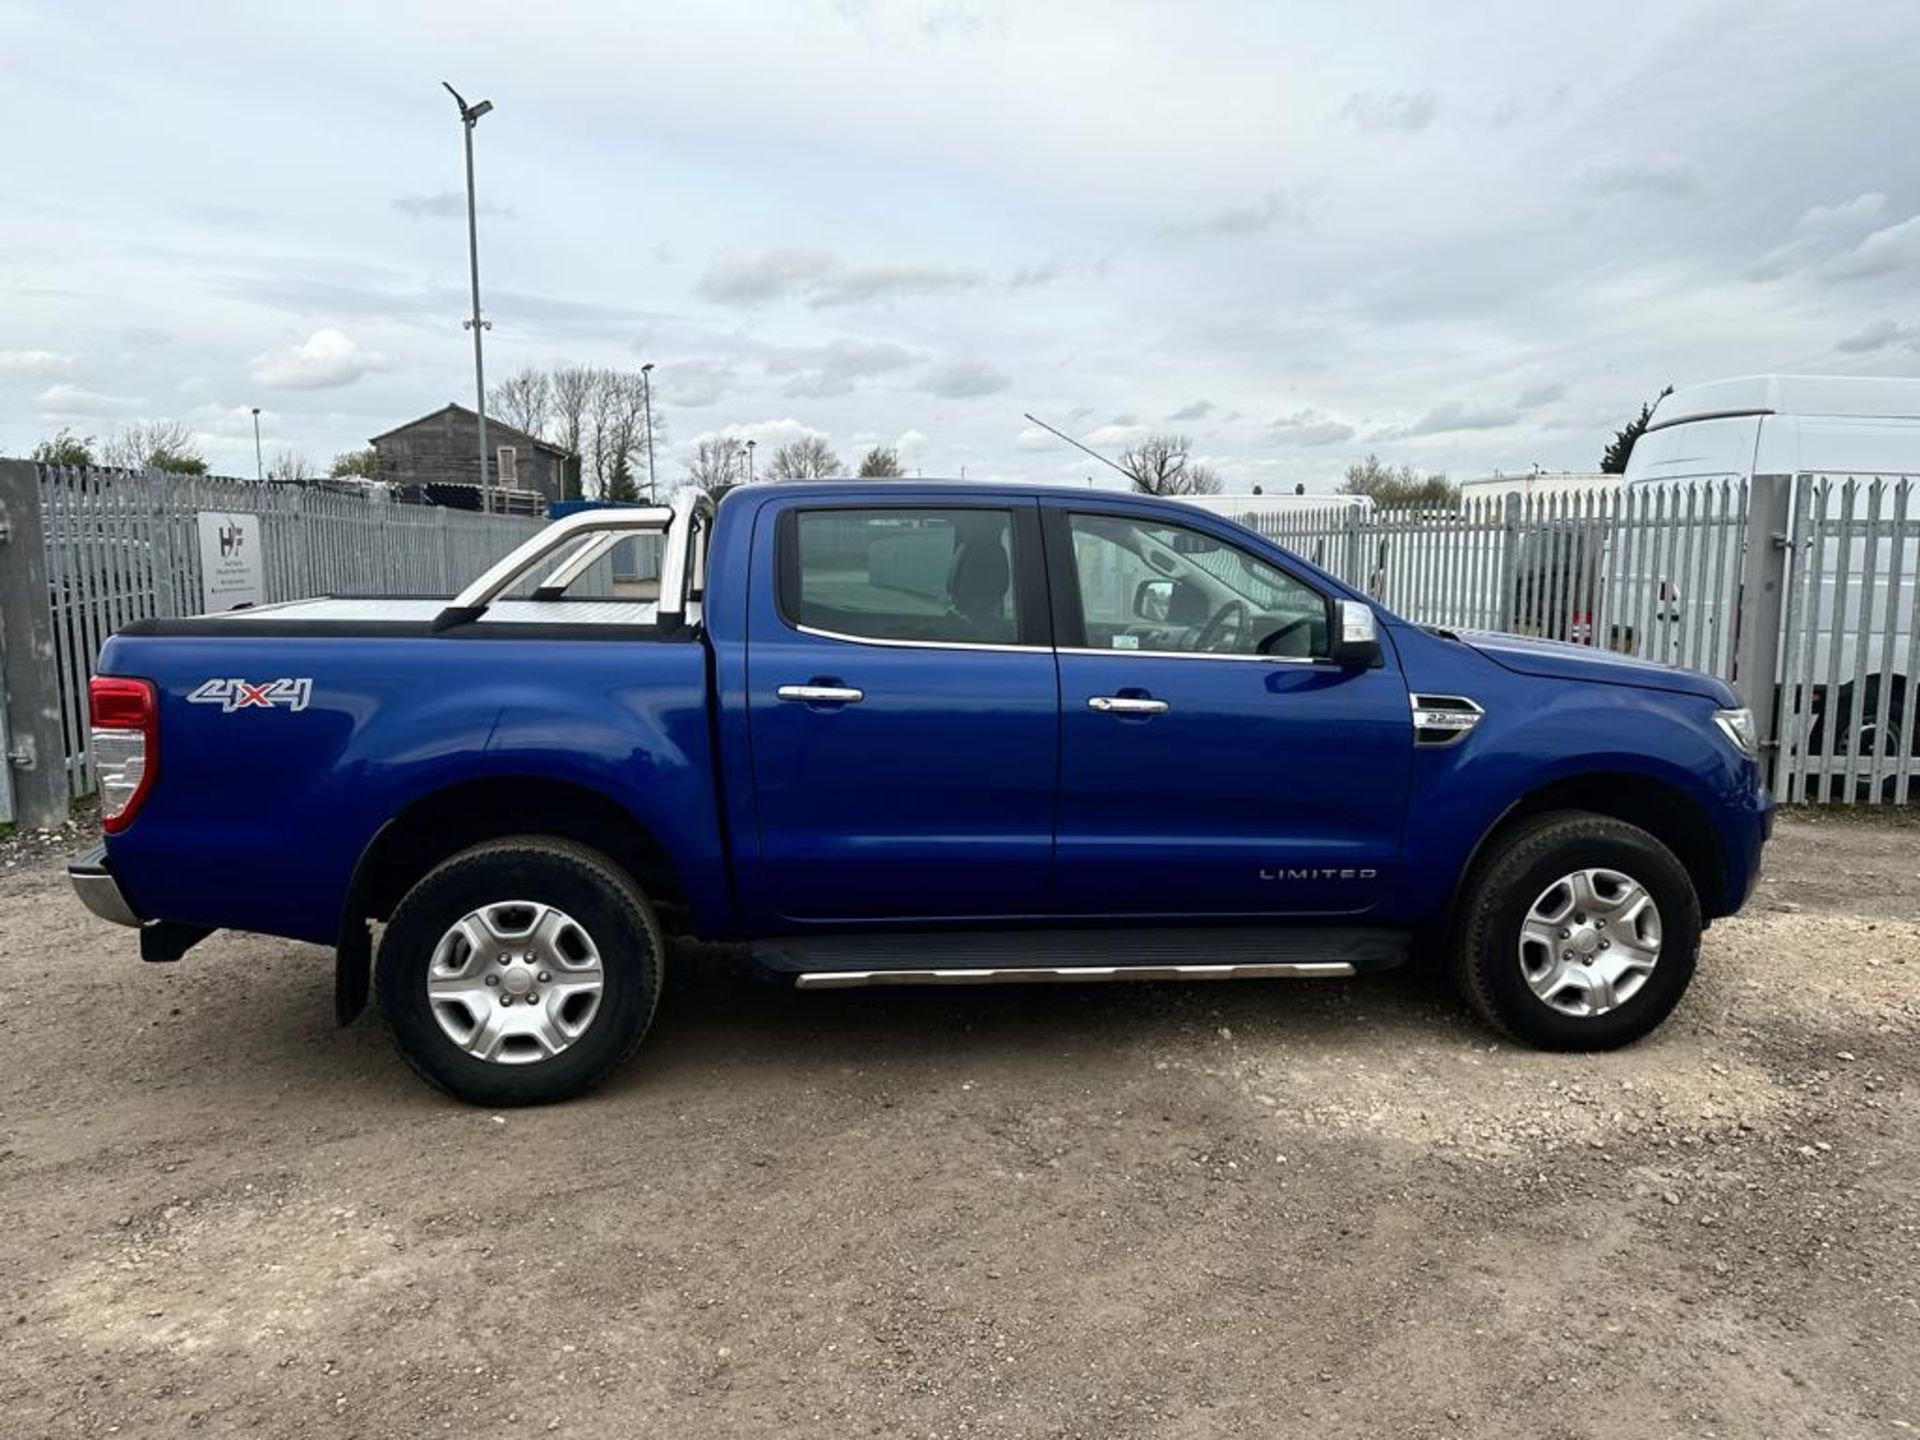 ** ON SALE ** Ford Ranger Limited DCI TDCI 160 4X4 2016 '16 Reg'-Automatic - A/C - -Bluetooth-No Vat - Image 13 of 38